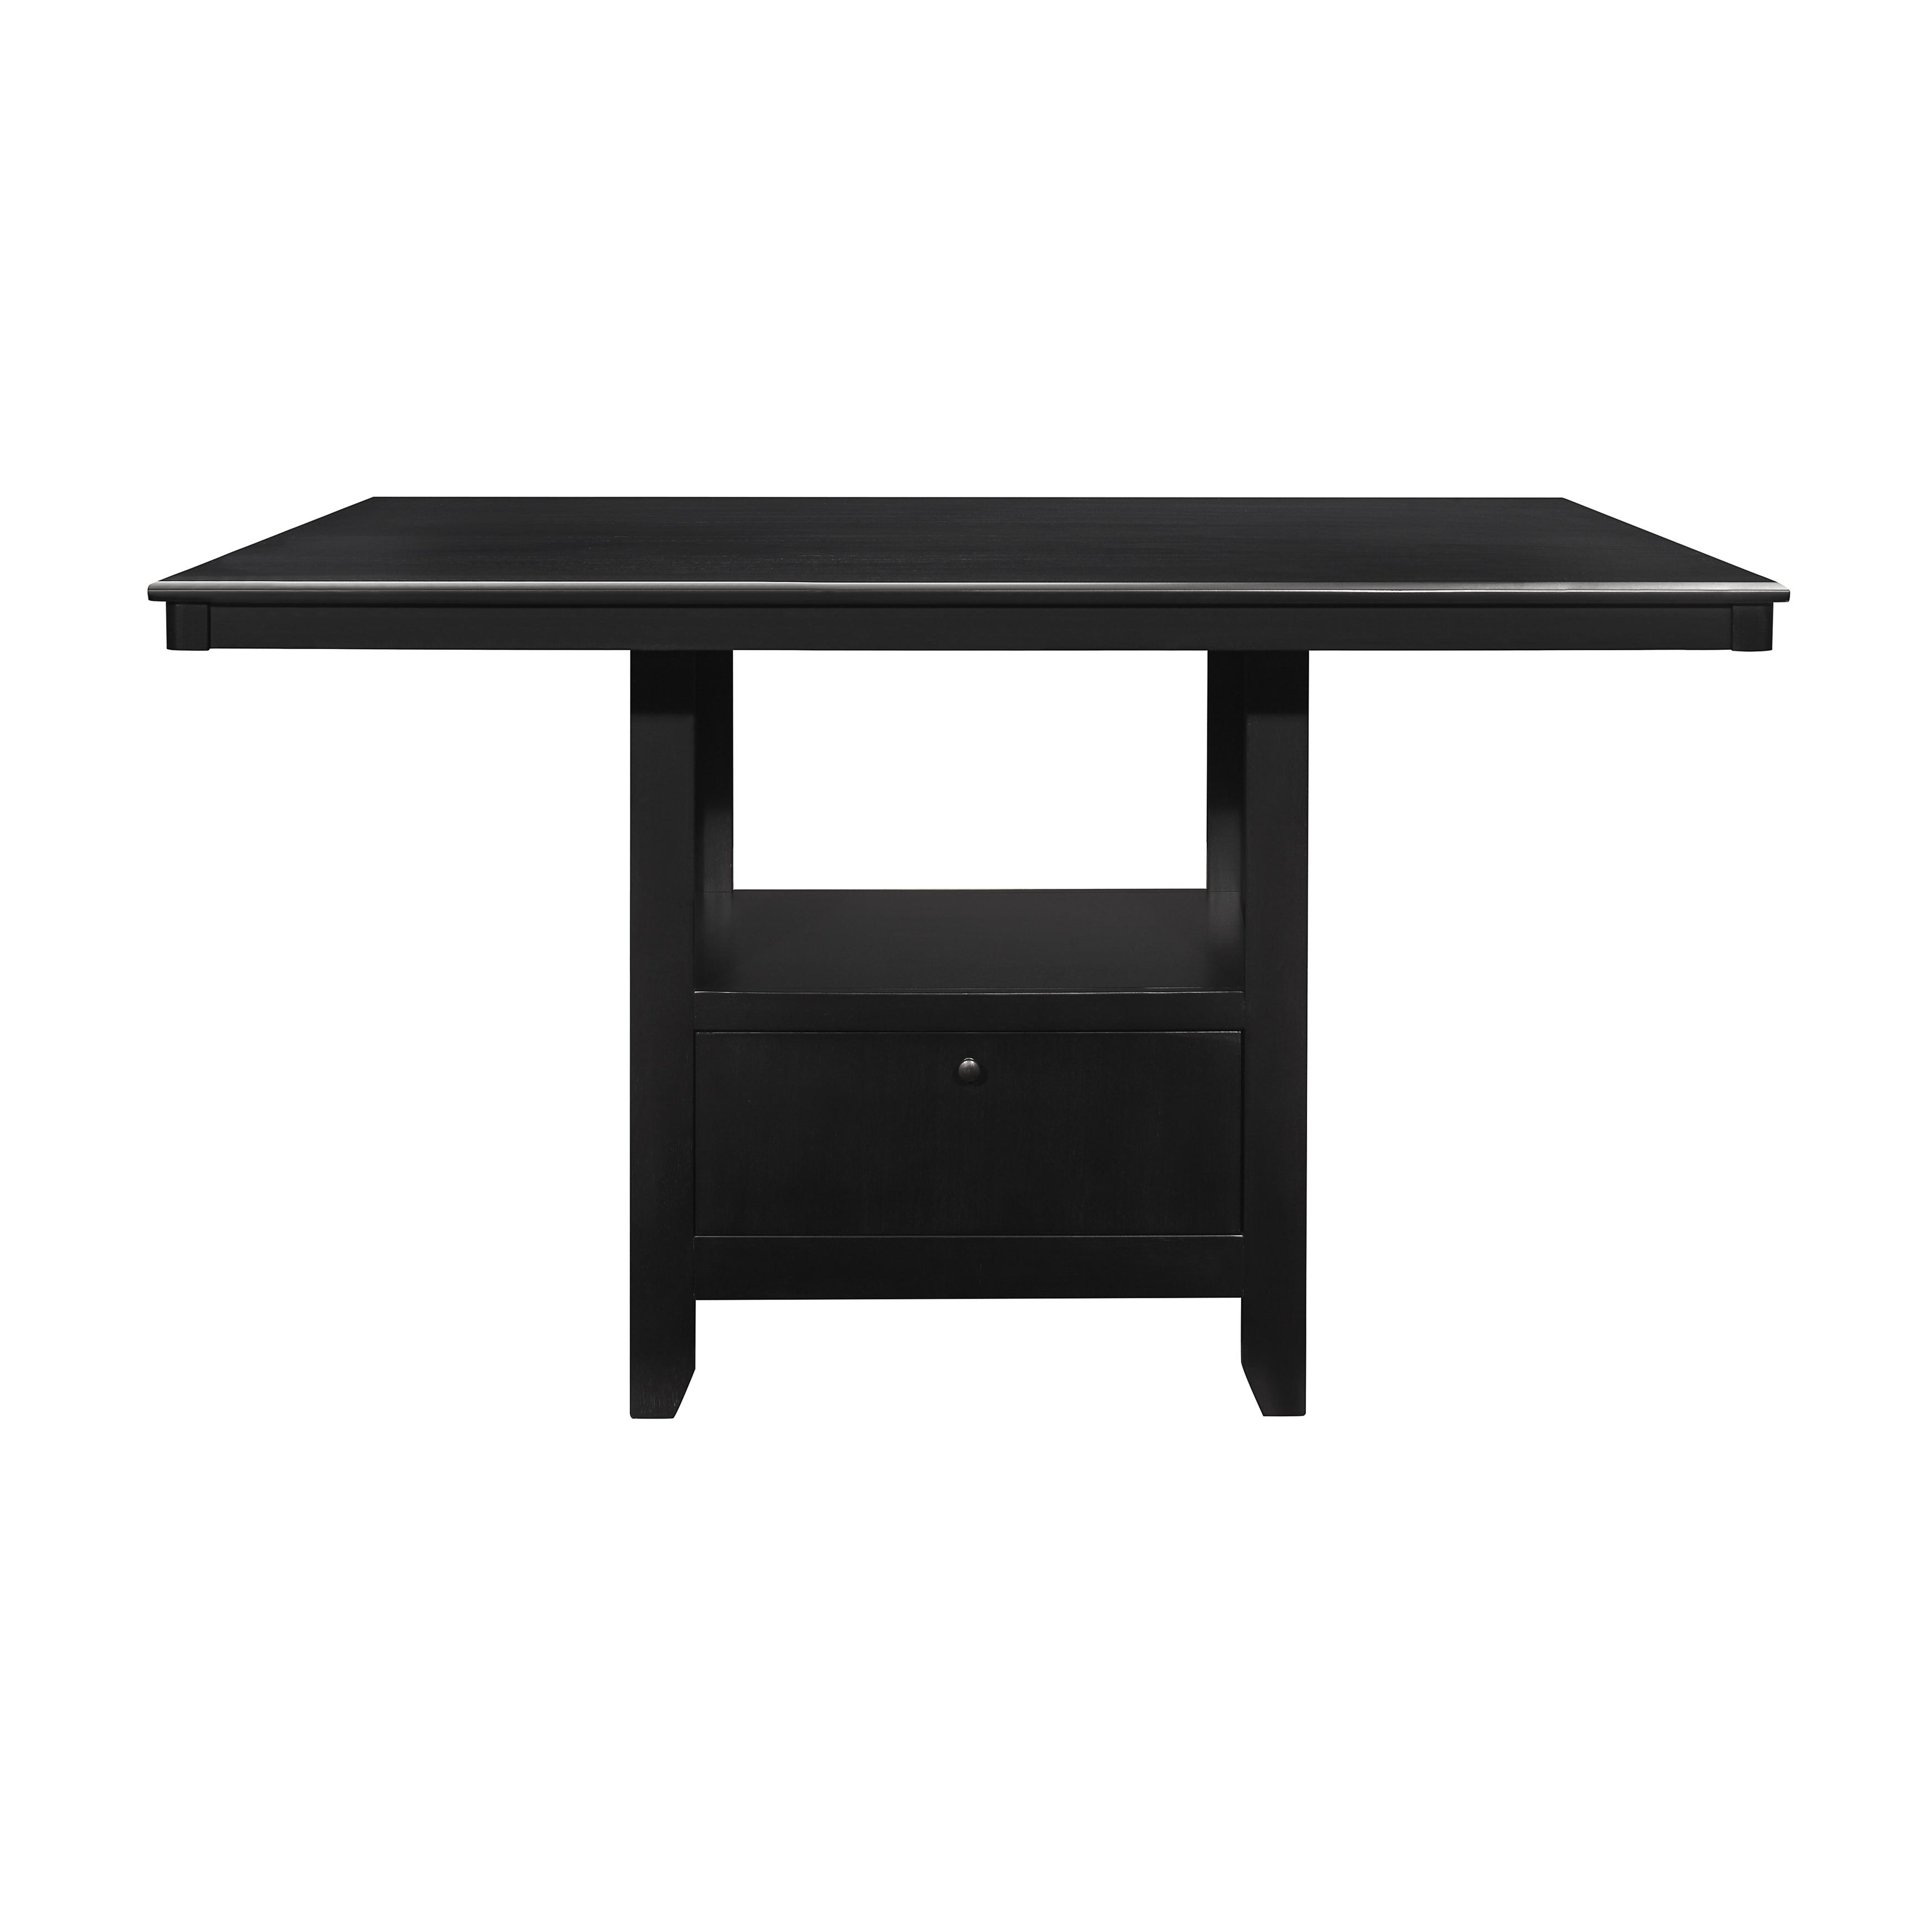 Contemporary Counter Height Table Raven Counter Height Dining Table 5825-36-CT 5825-36-CT in Charcoal Grey 